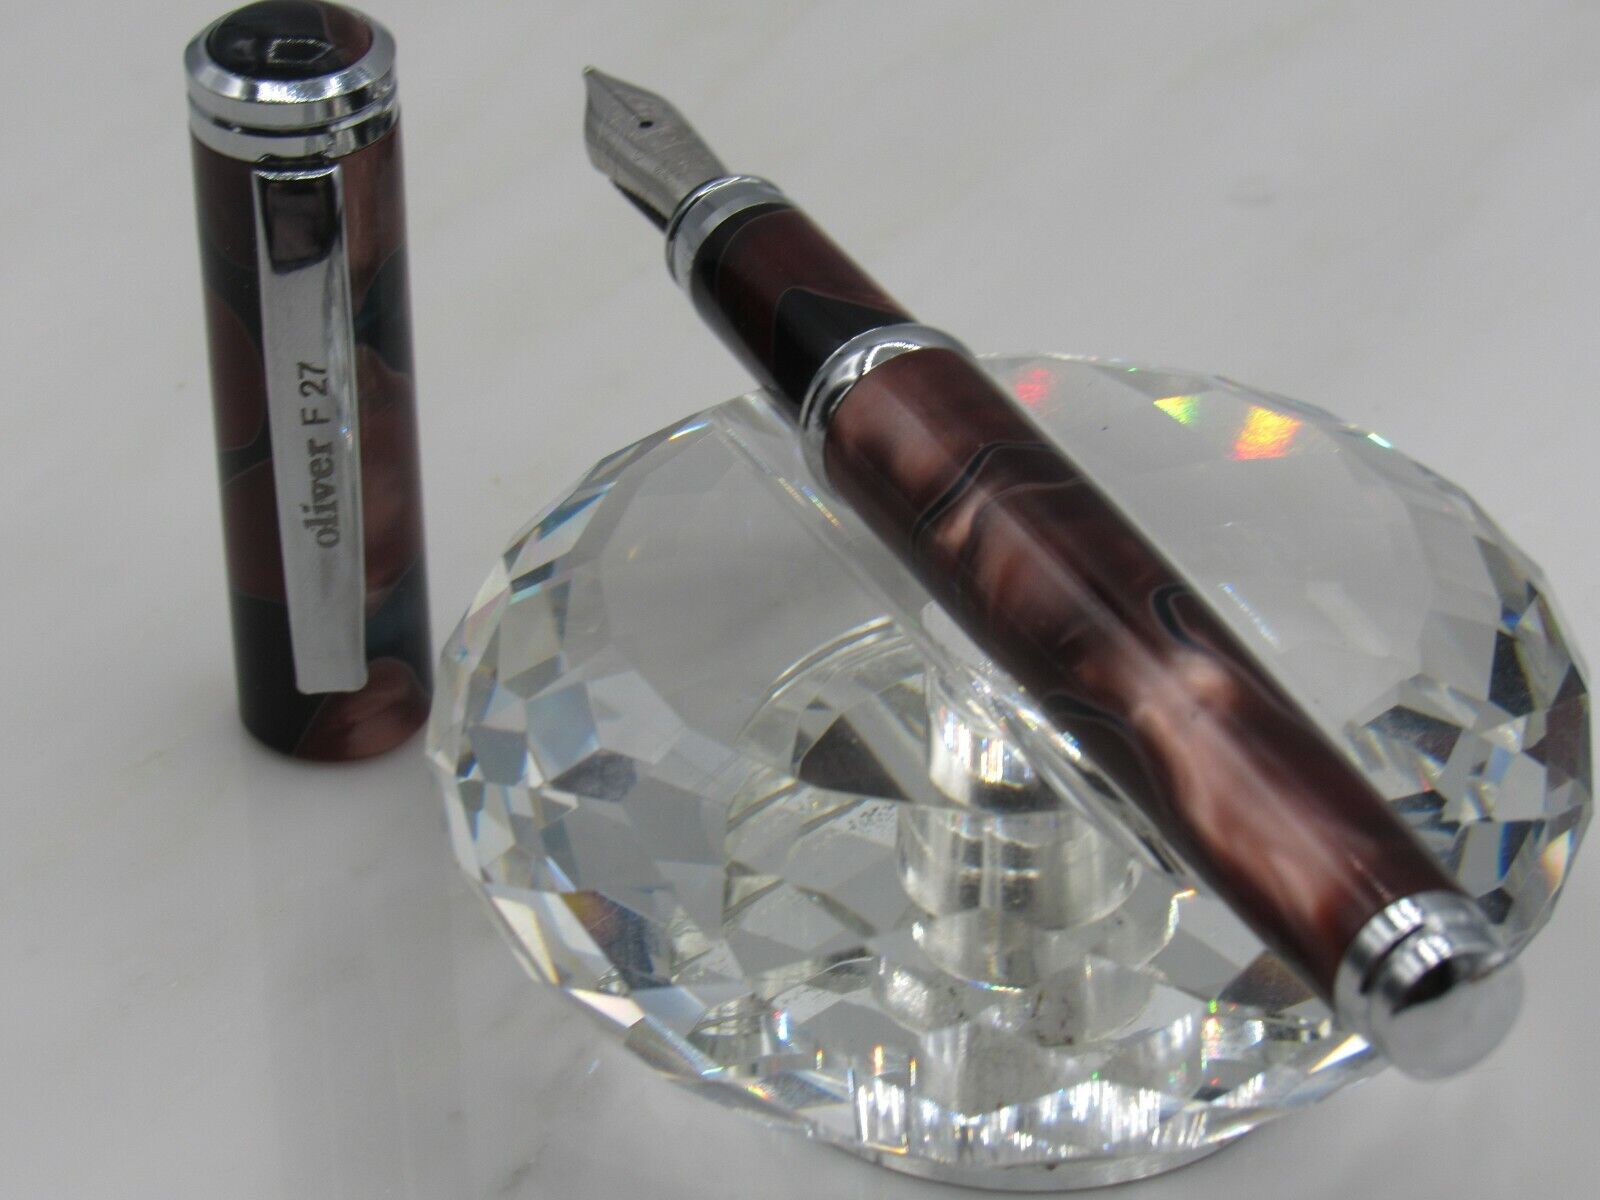 BEAUTIFUL HIGH QUALITY OLIVER F27 COPPER AND BLACK PEARL ACRYLIC  FOUNTAIN PEN